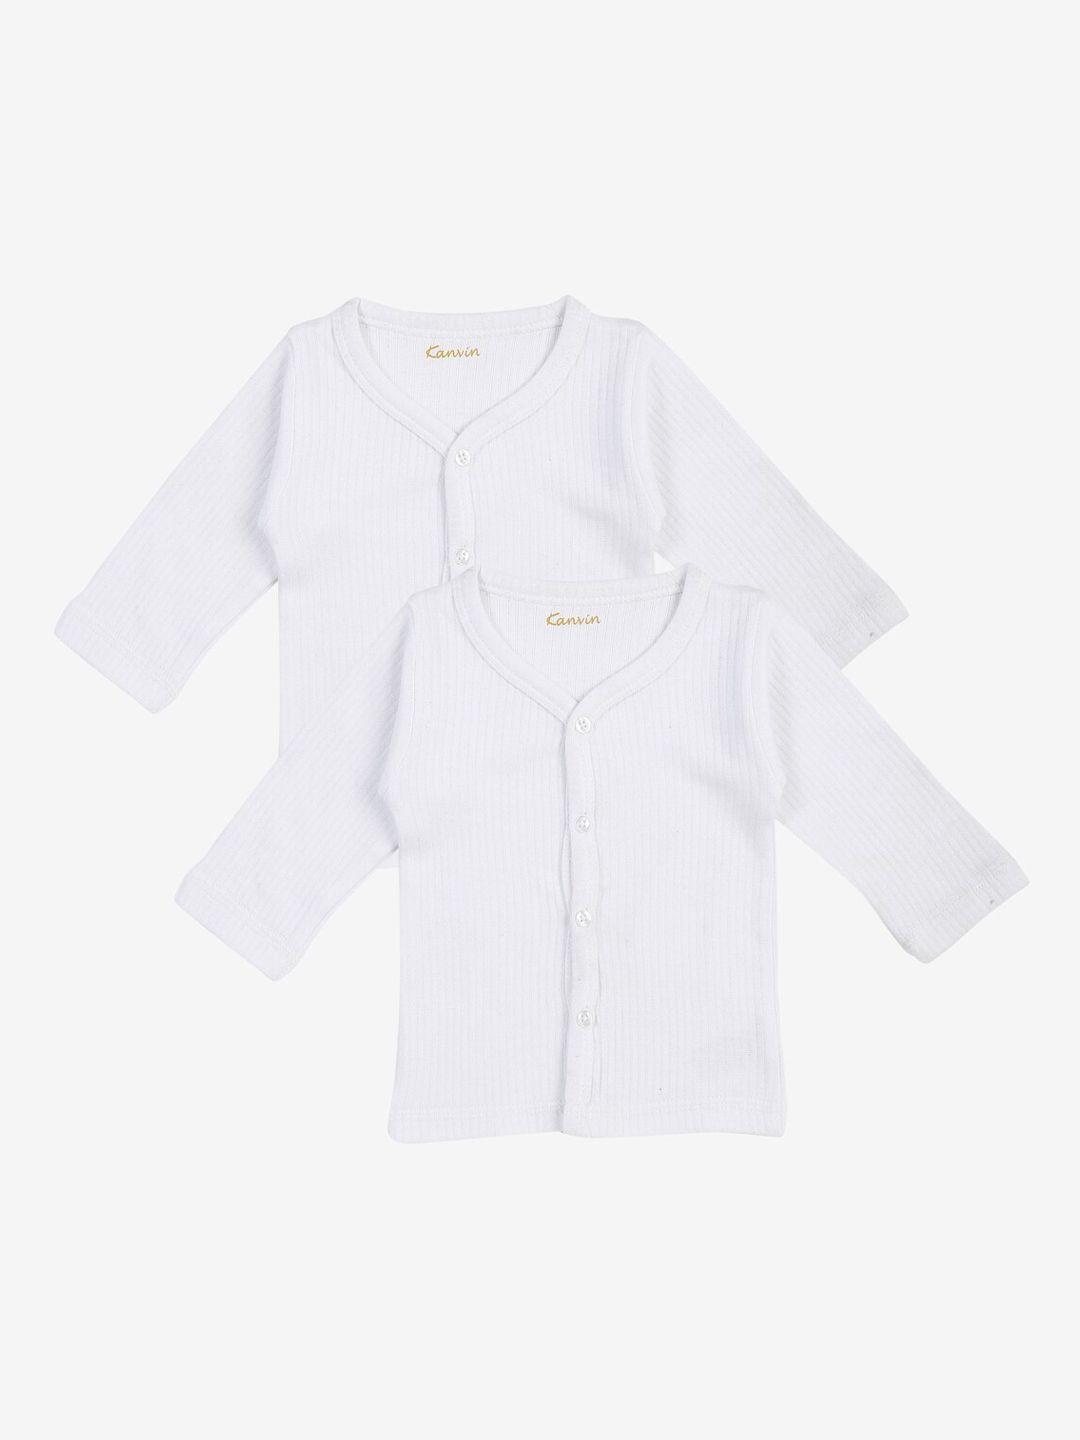 kanvin pack of 2 boys white cotton thermal top